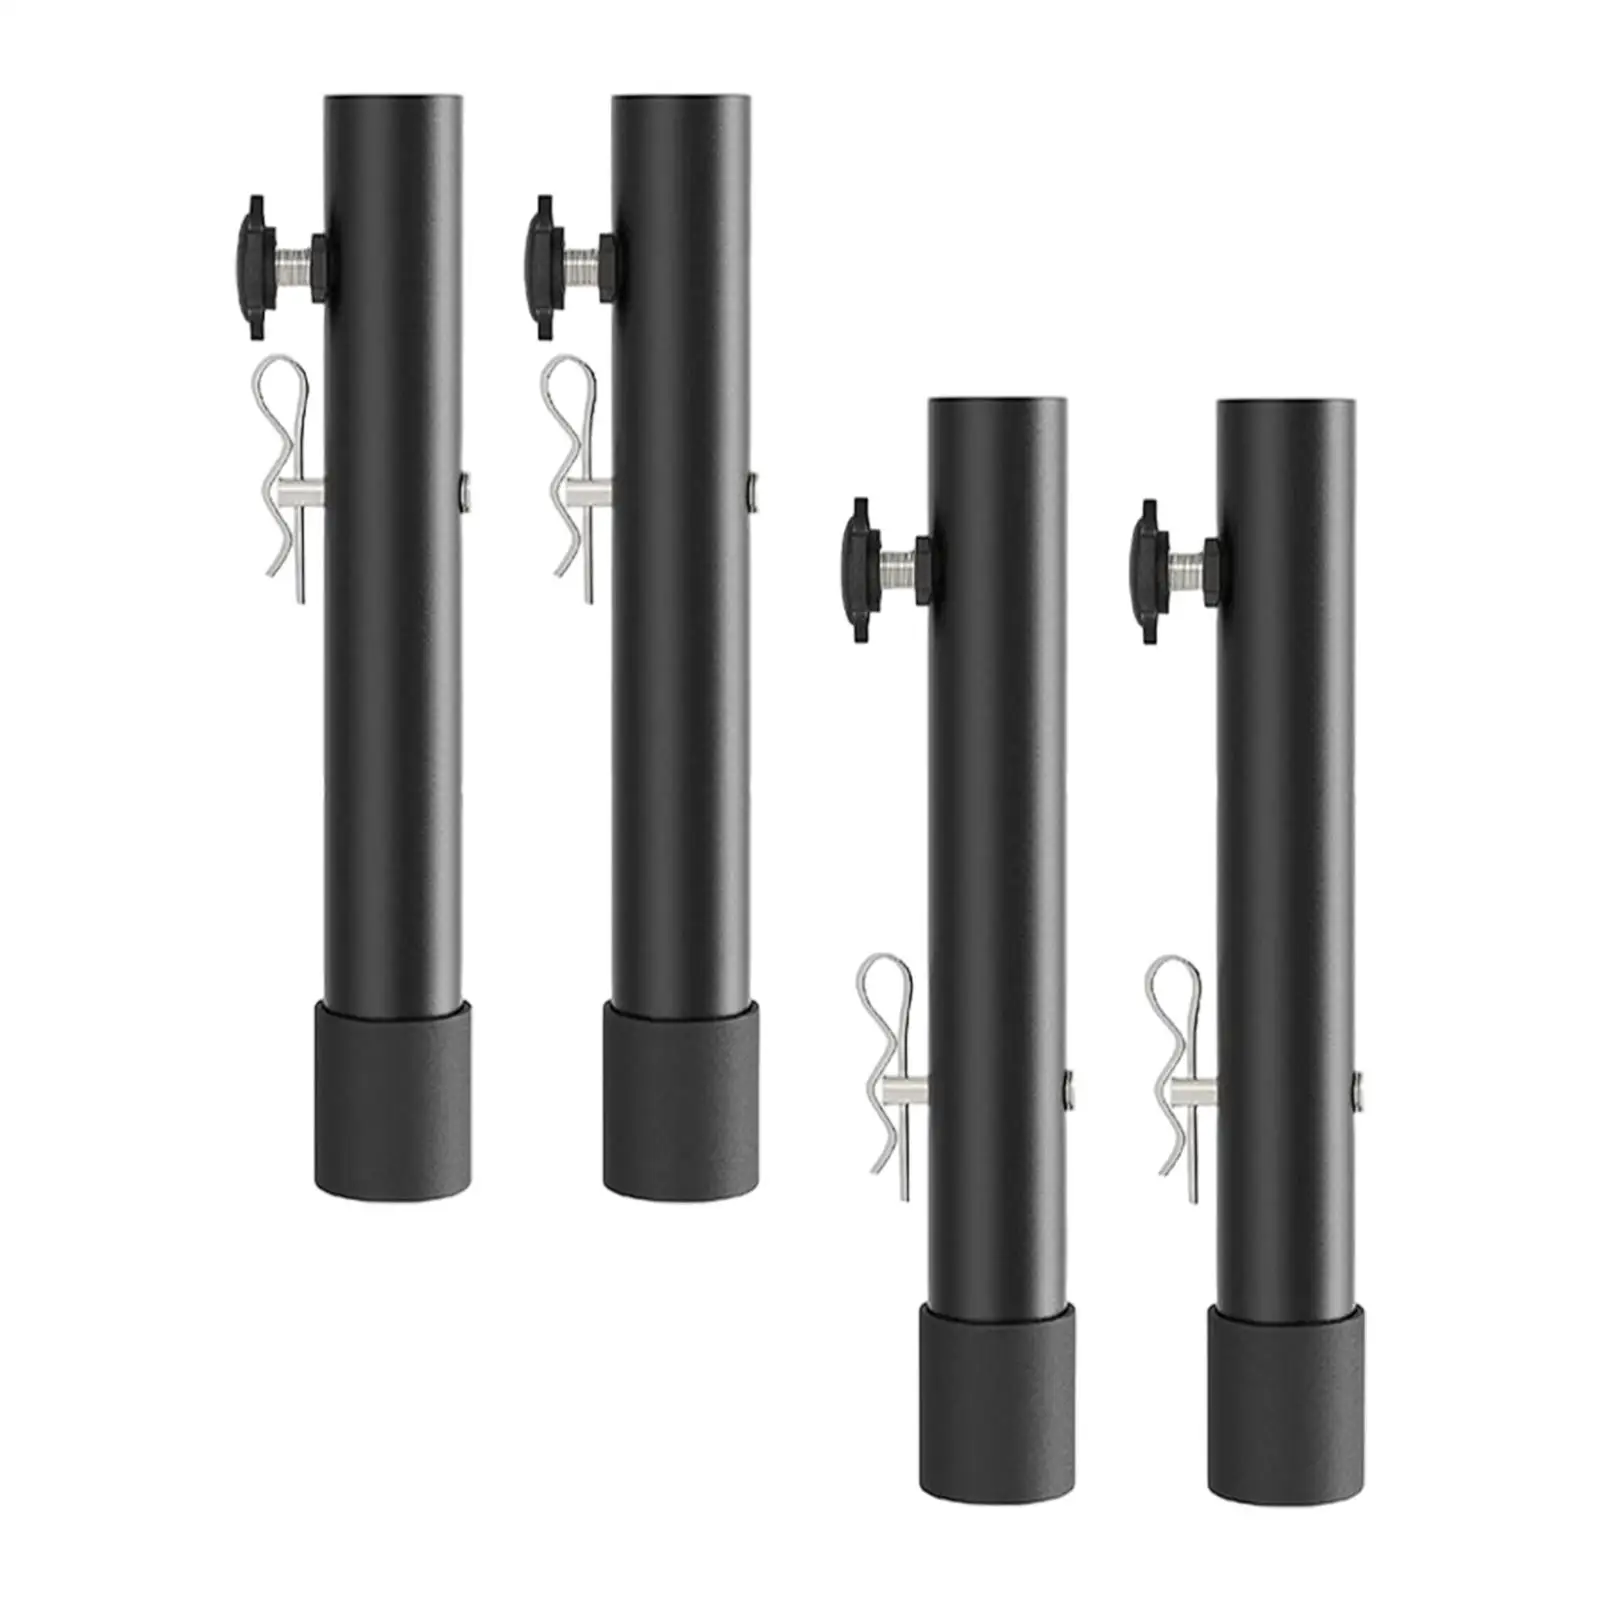 Desk Table Leg Risers for Straight Bent Table Legs Removable Desk Accessories Folding Table Leg Risers Adjustable for Kitchen